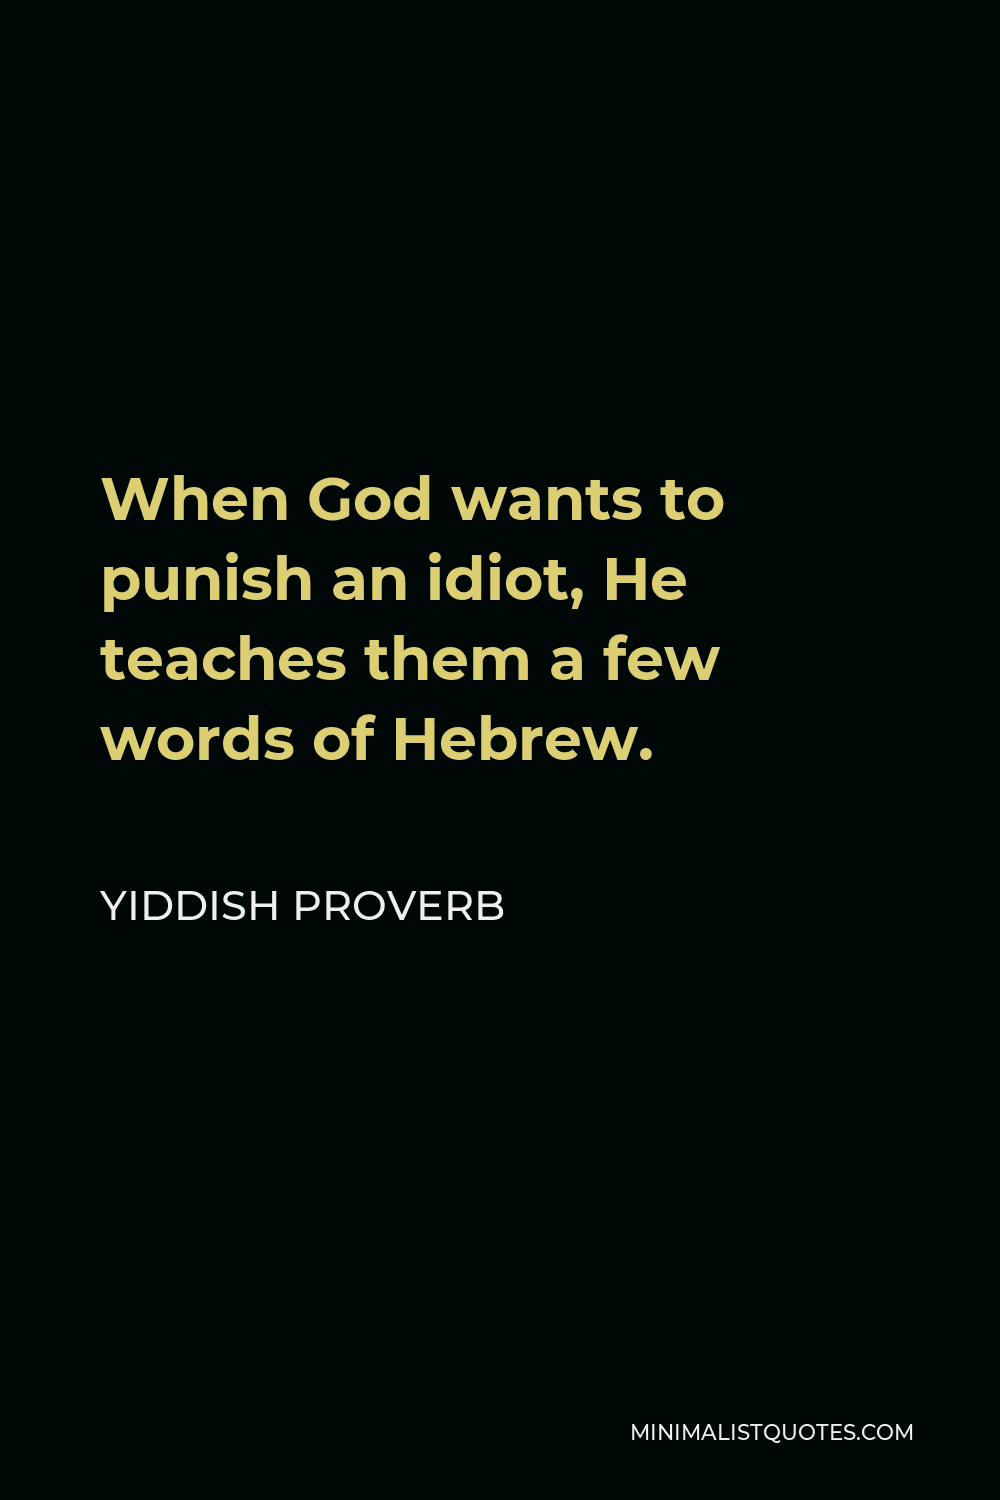 Yiddish Proverb Quote - When God wants to punish an idiot, He teaches them a few words of Hebrew.